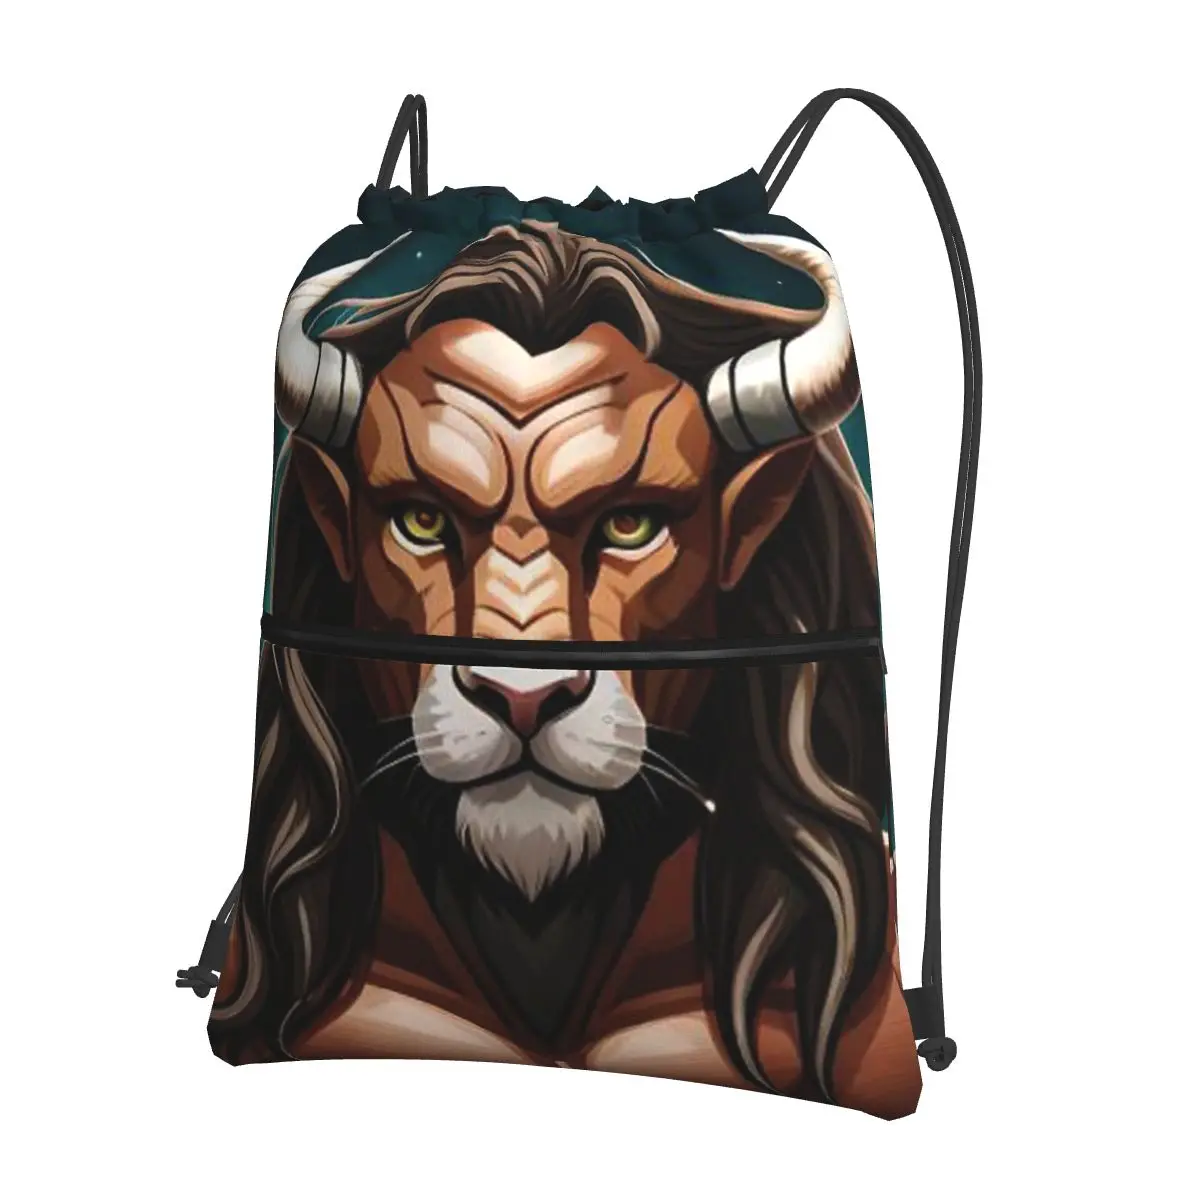 

Minotaur Portrait A Mythical Tribute To Strength And Mystery Backpacks Drawstring Bag Drawstring Bundle Pocket Book Bags School